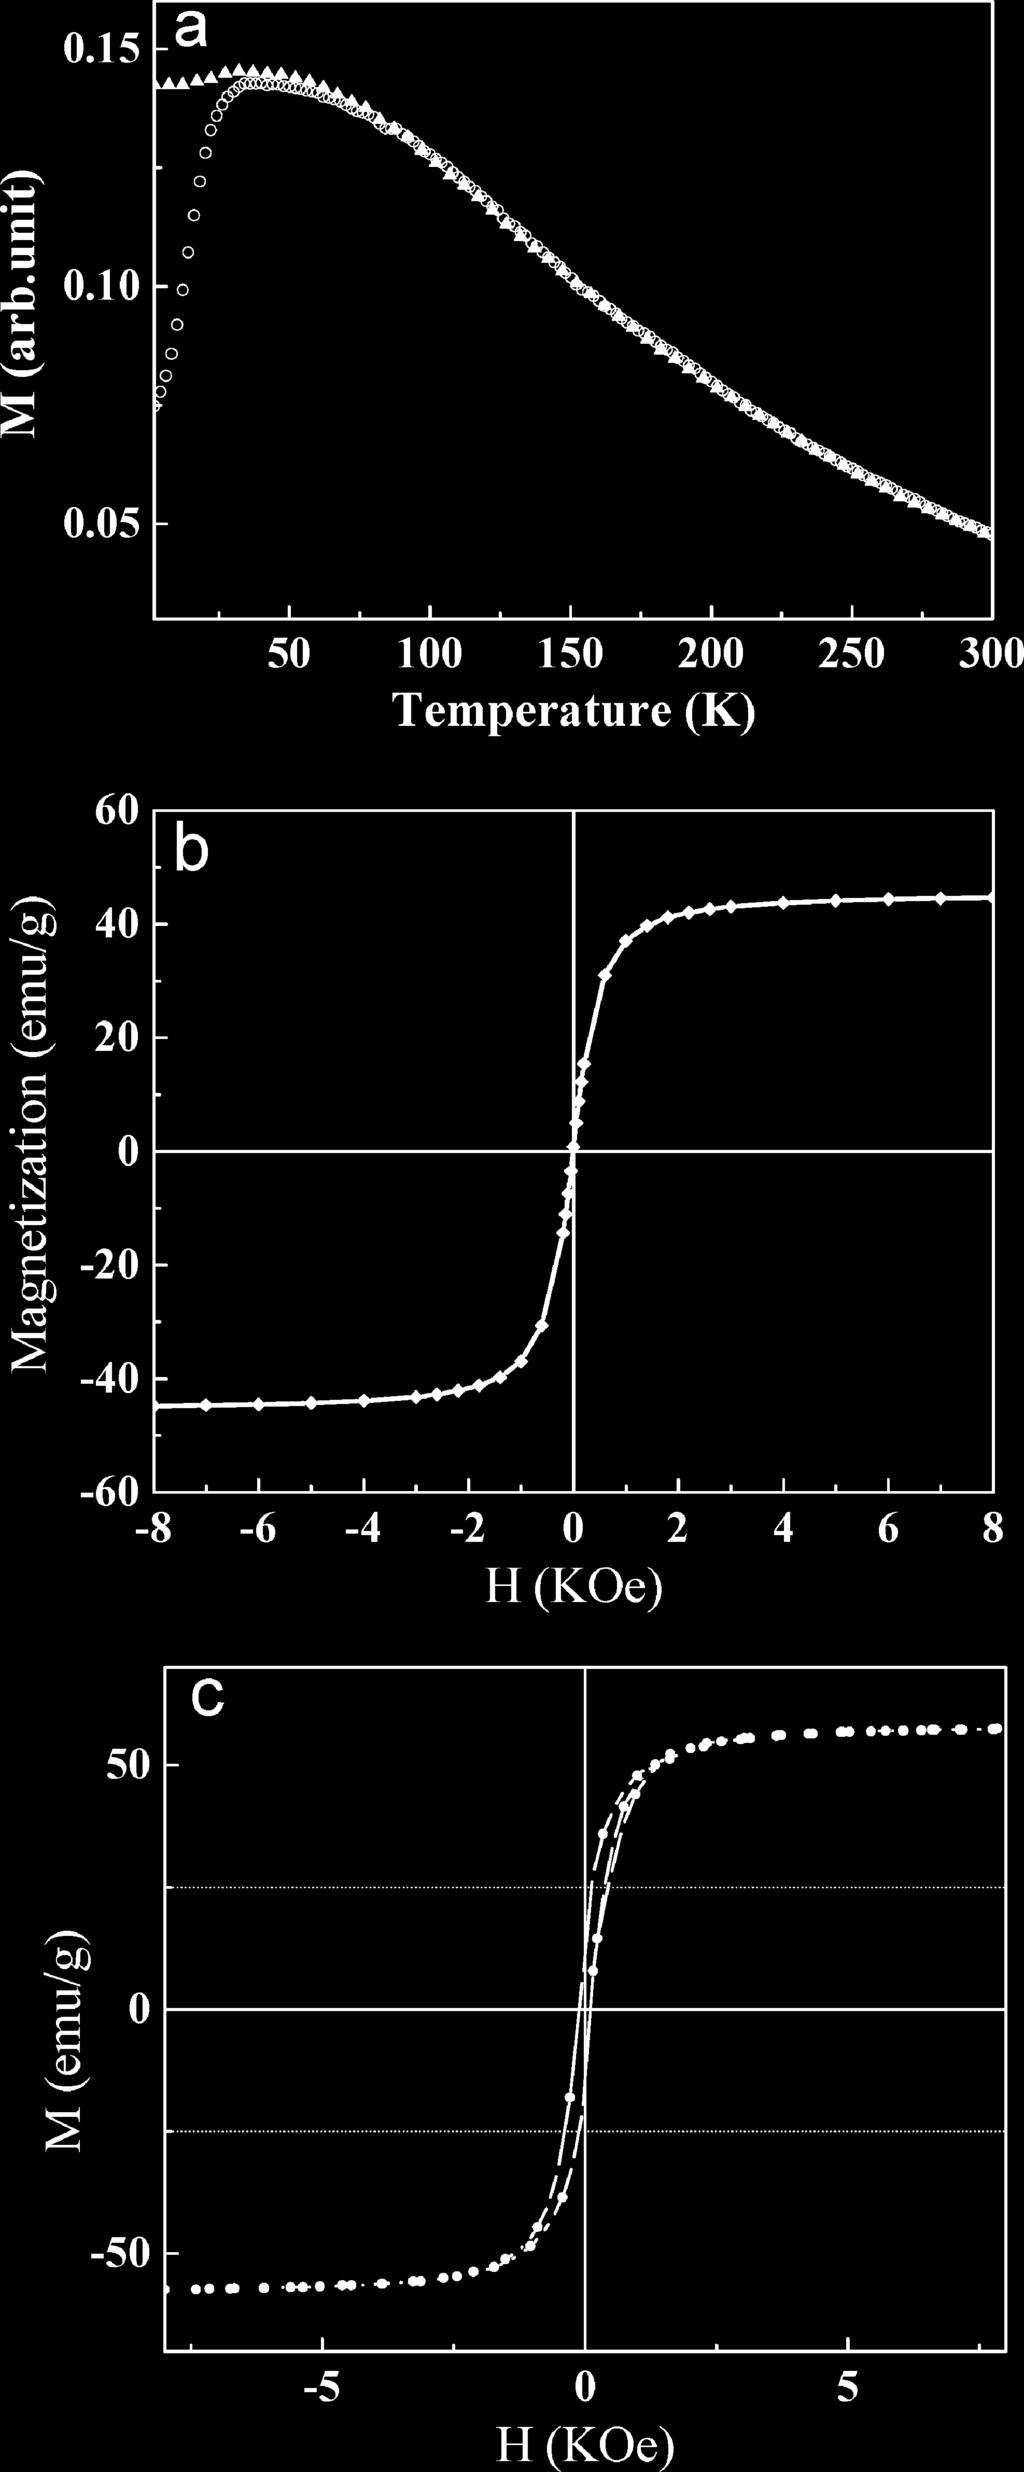 hydrophilic NPs were packed into large particles and the large ones formed a circle; (d) the large particles formed a line. The hysteresis loop (Fig.